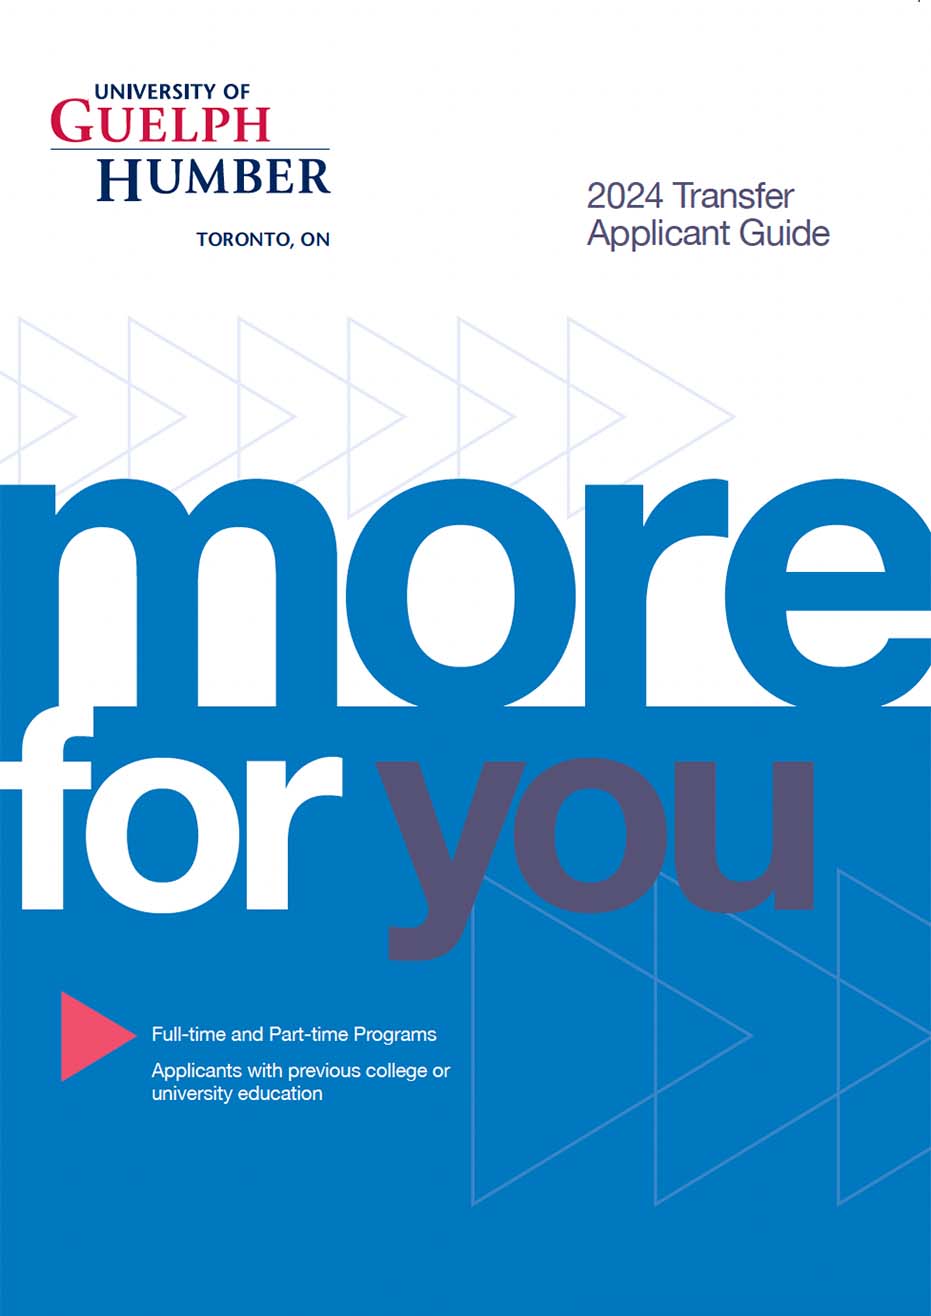 Cover page of Transfer Guide